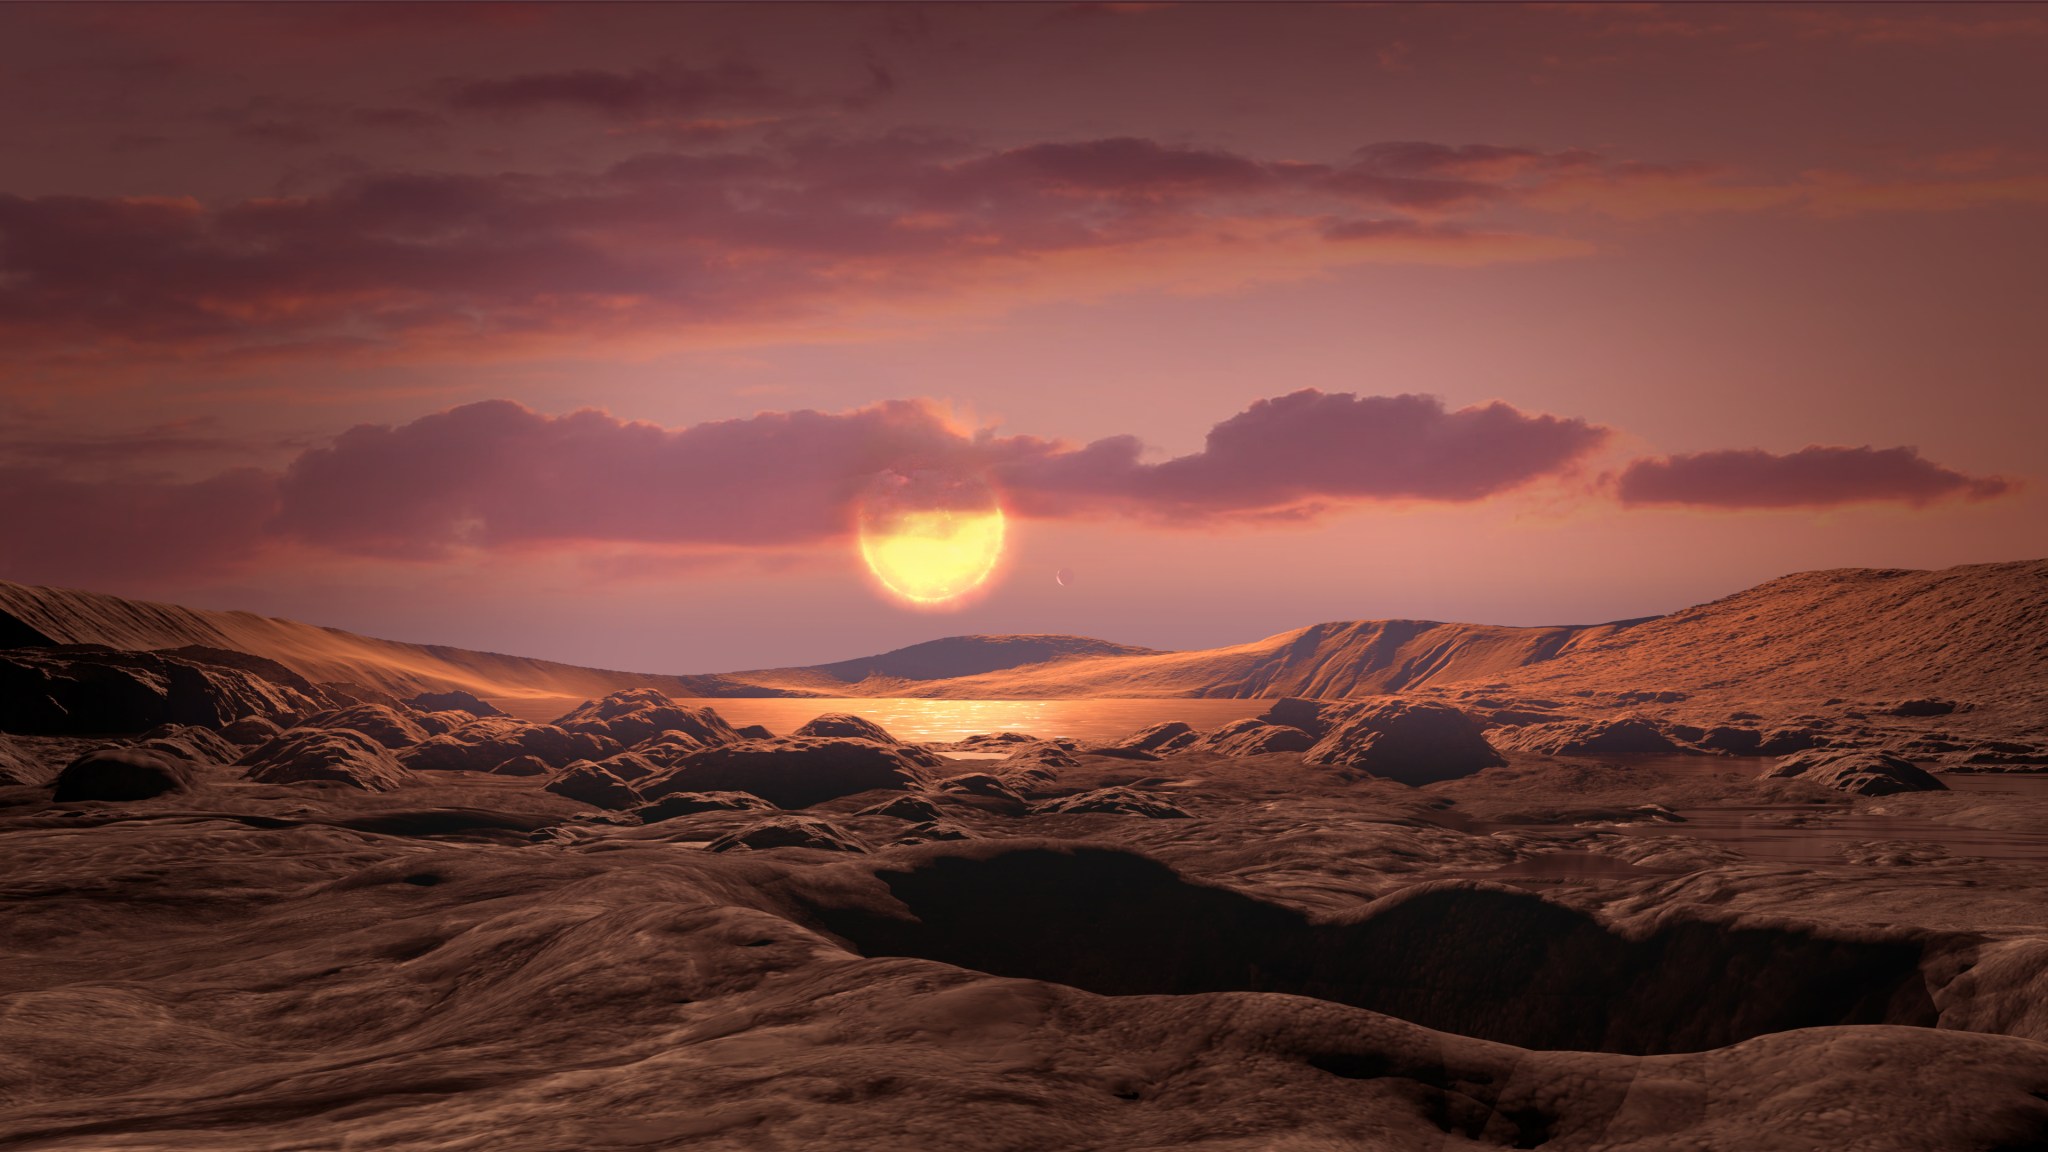 An illustration of what Kepler-1649c could look like from its surface.